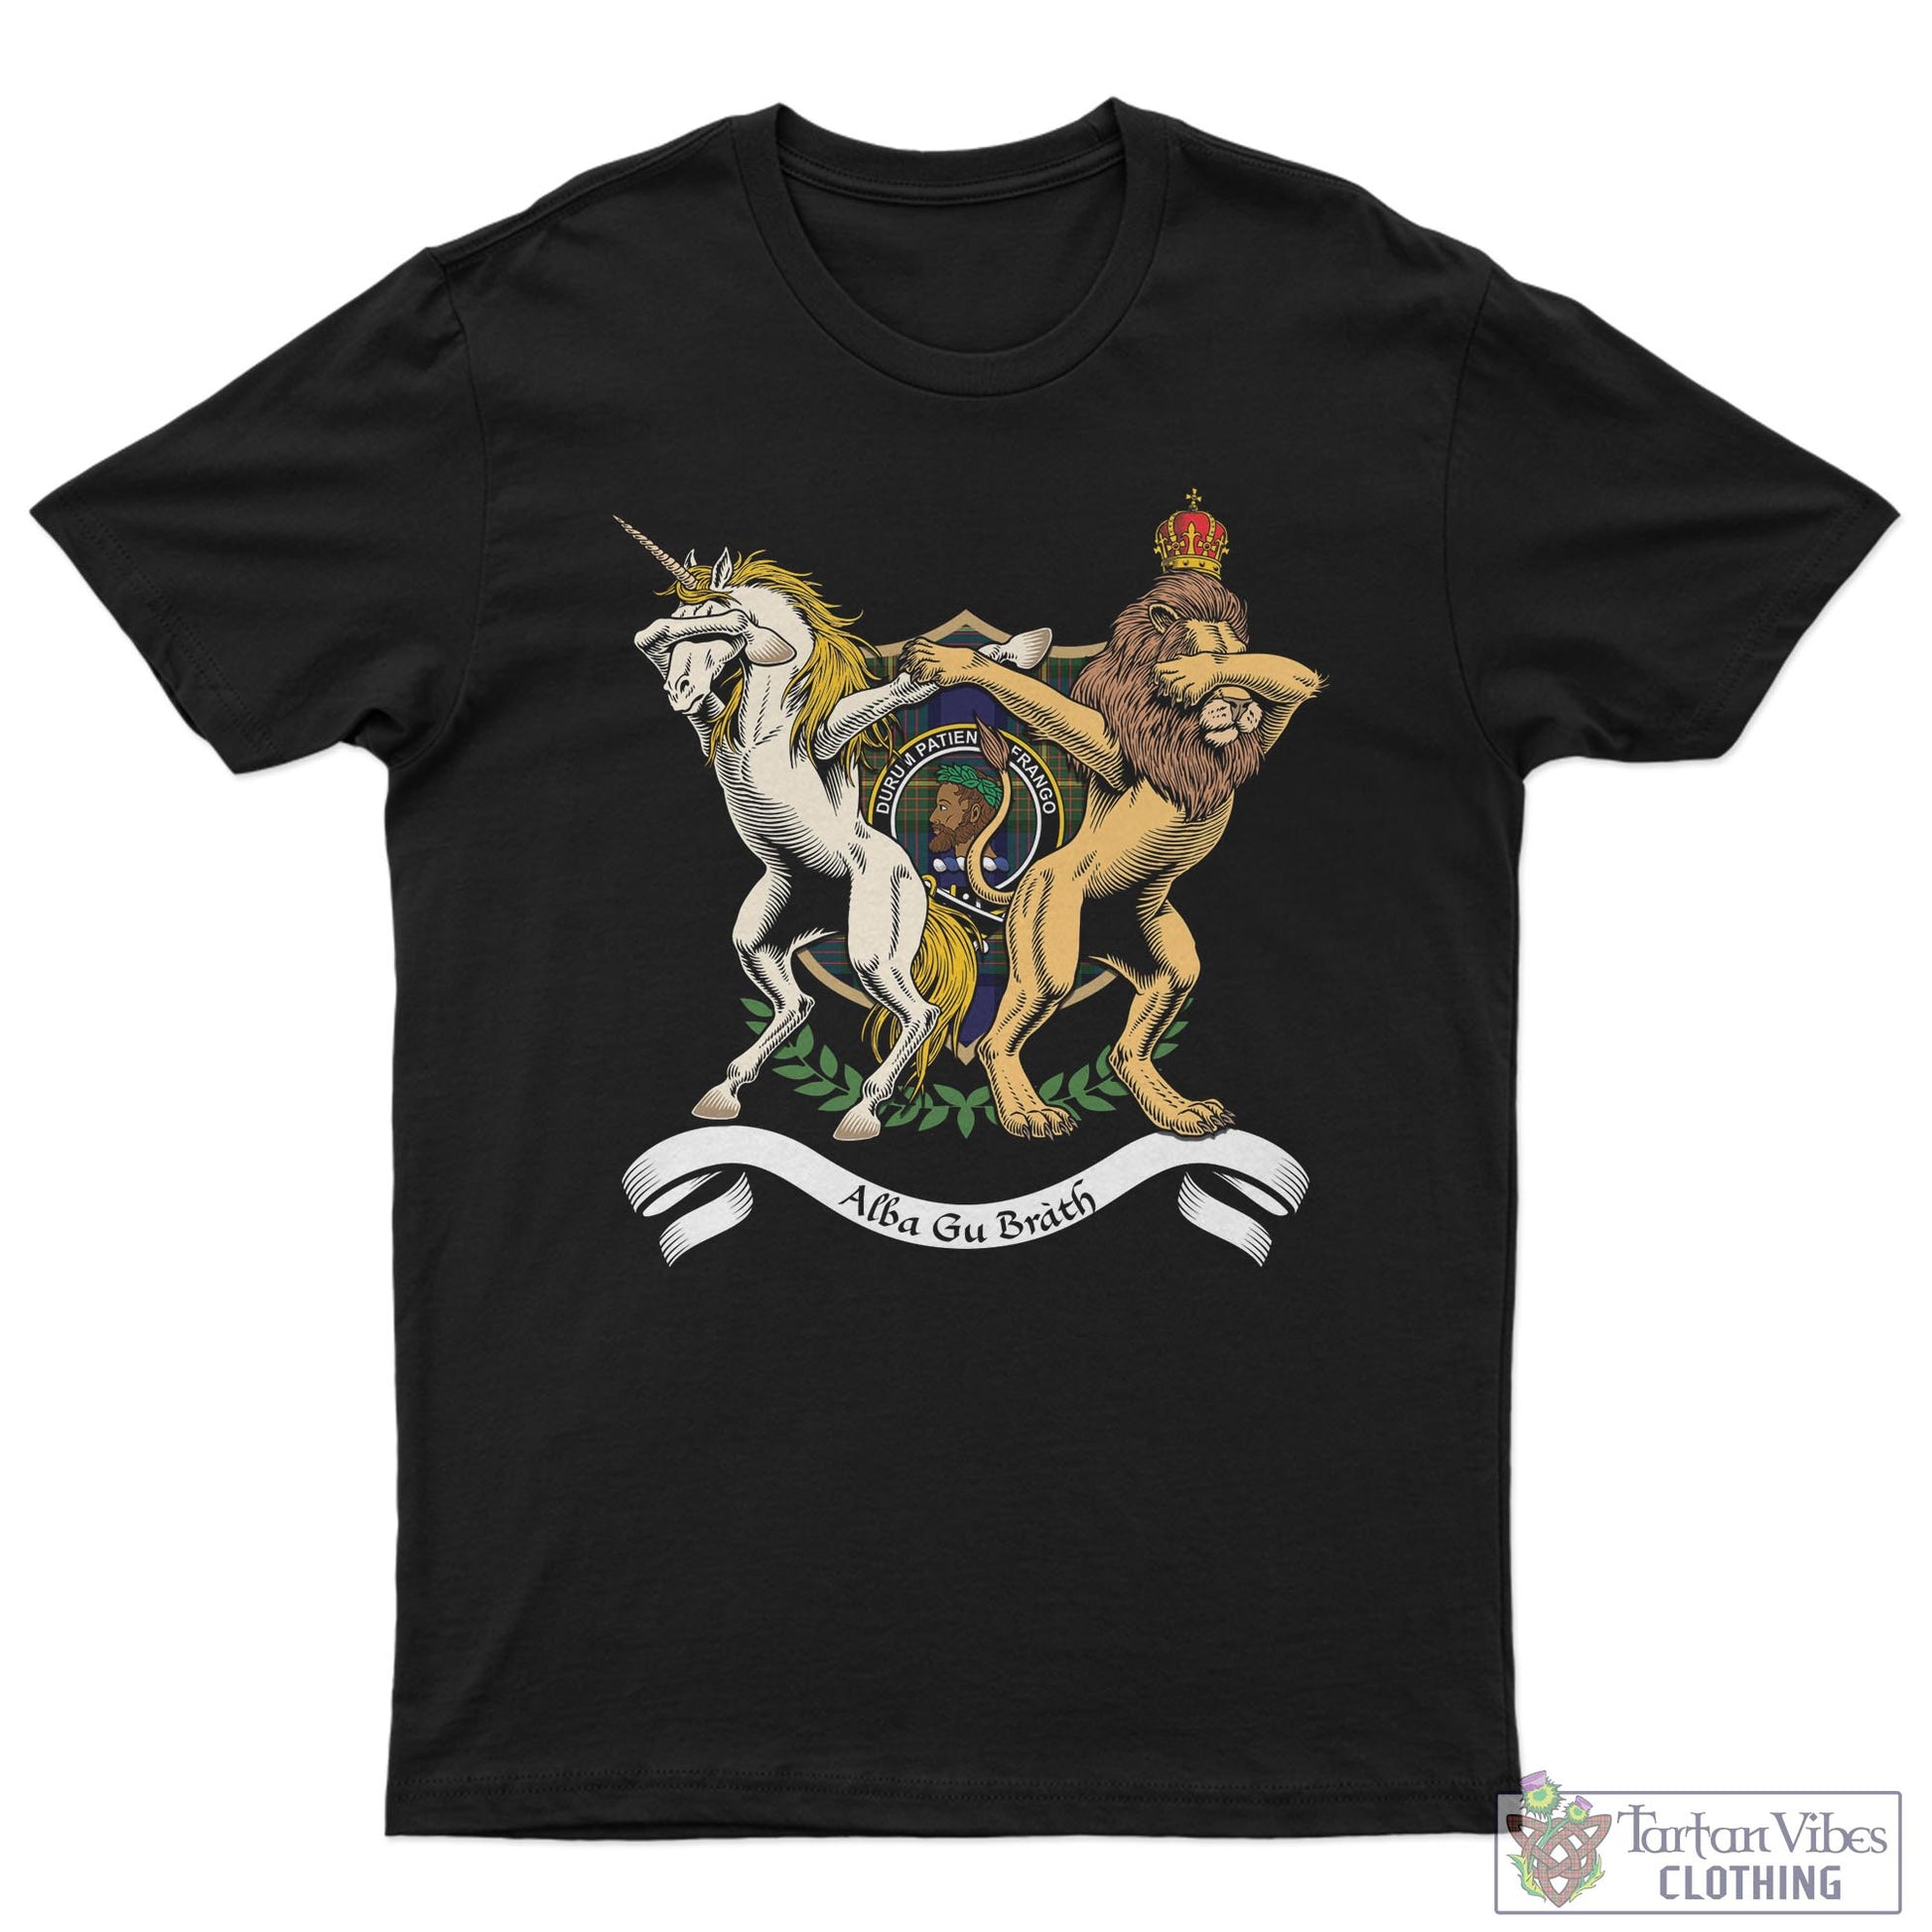 Tartan Vibes Clothing Moore Family Crest Cotton Men's T-Shirt with Scotland Royal Coat Of Arm Funny Style